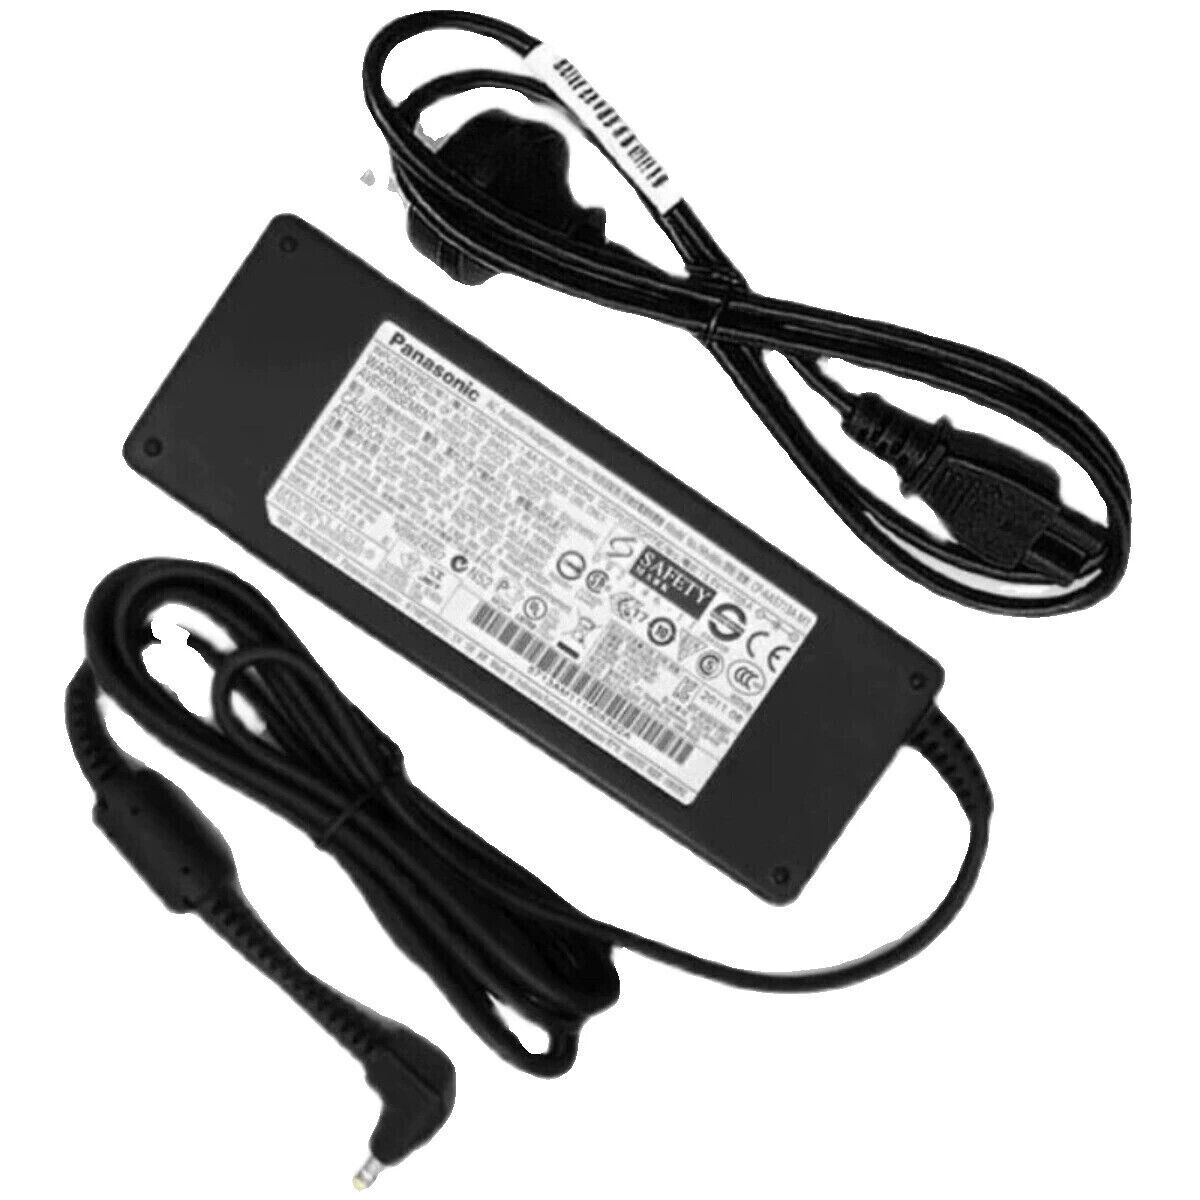 110W Genuine CF-AA5713A AC Charger for Panasonic CF-19/31/52/53 Battery US